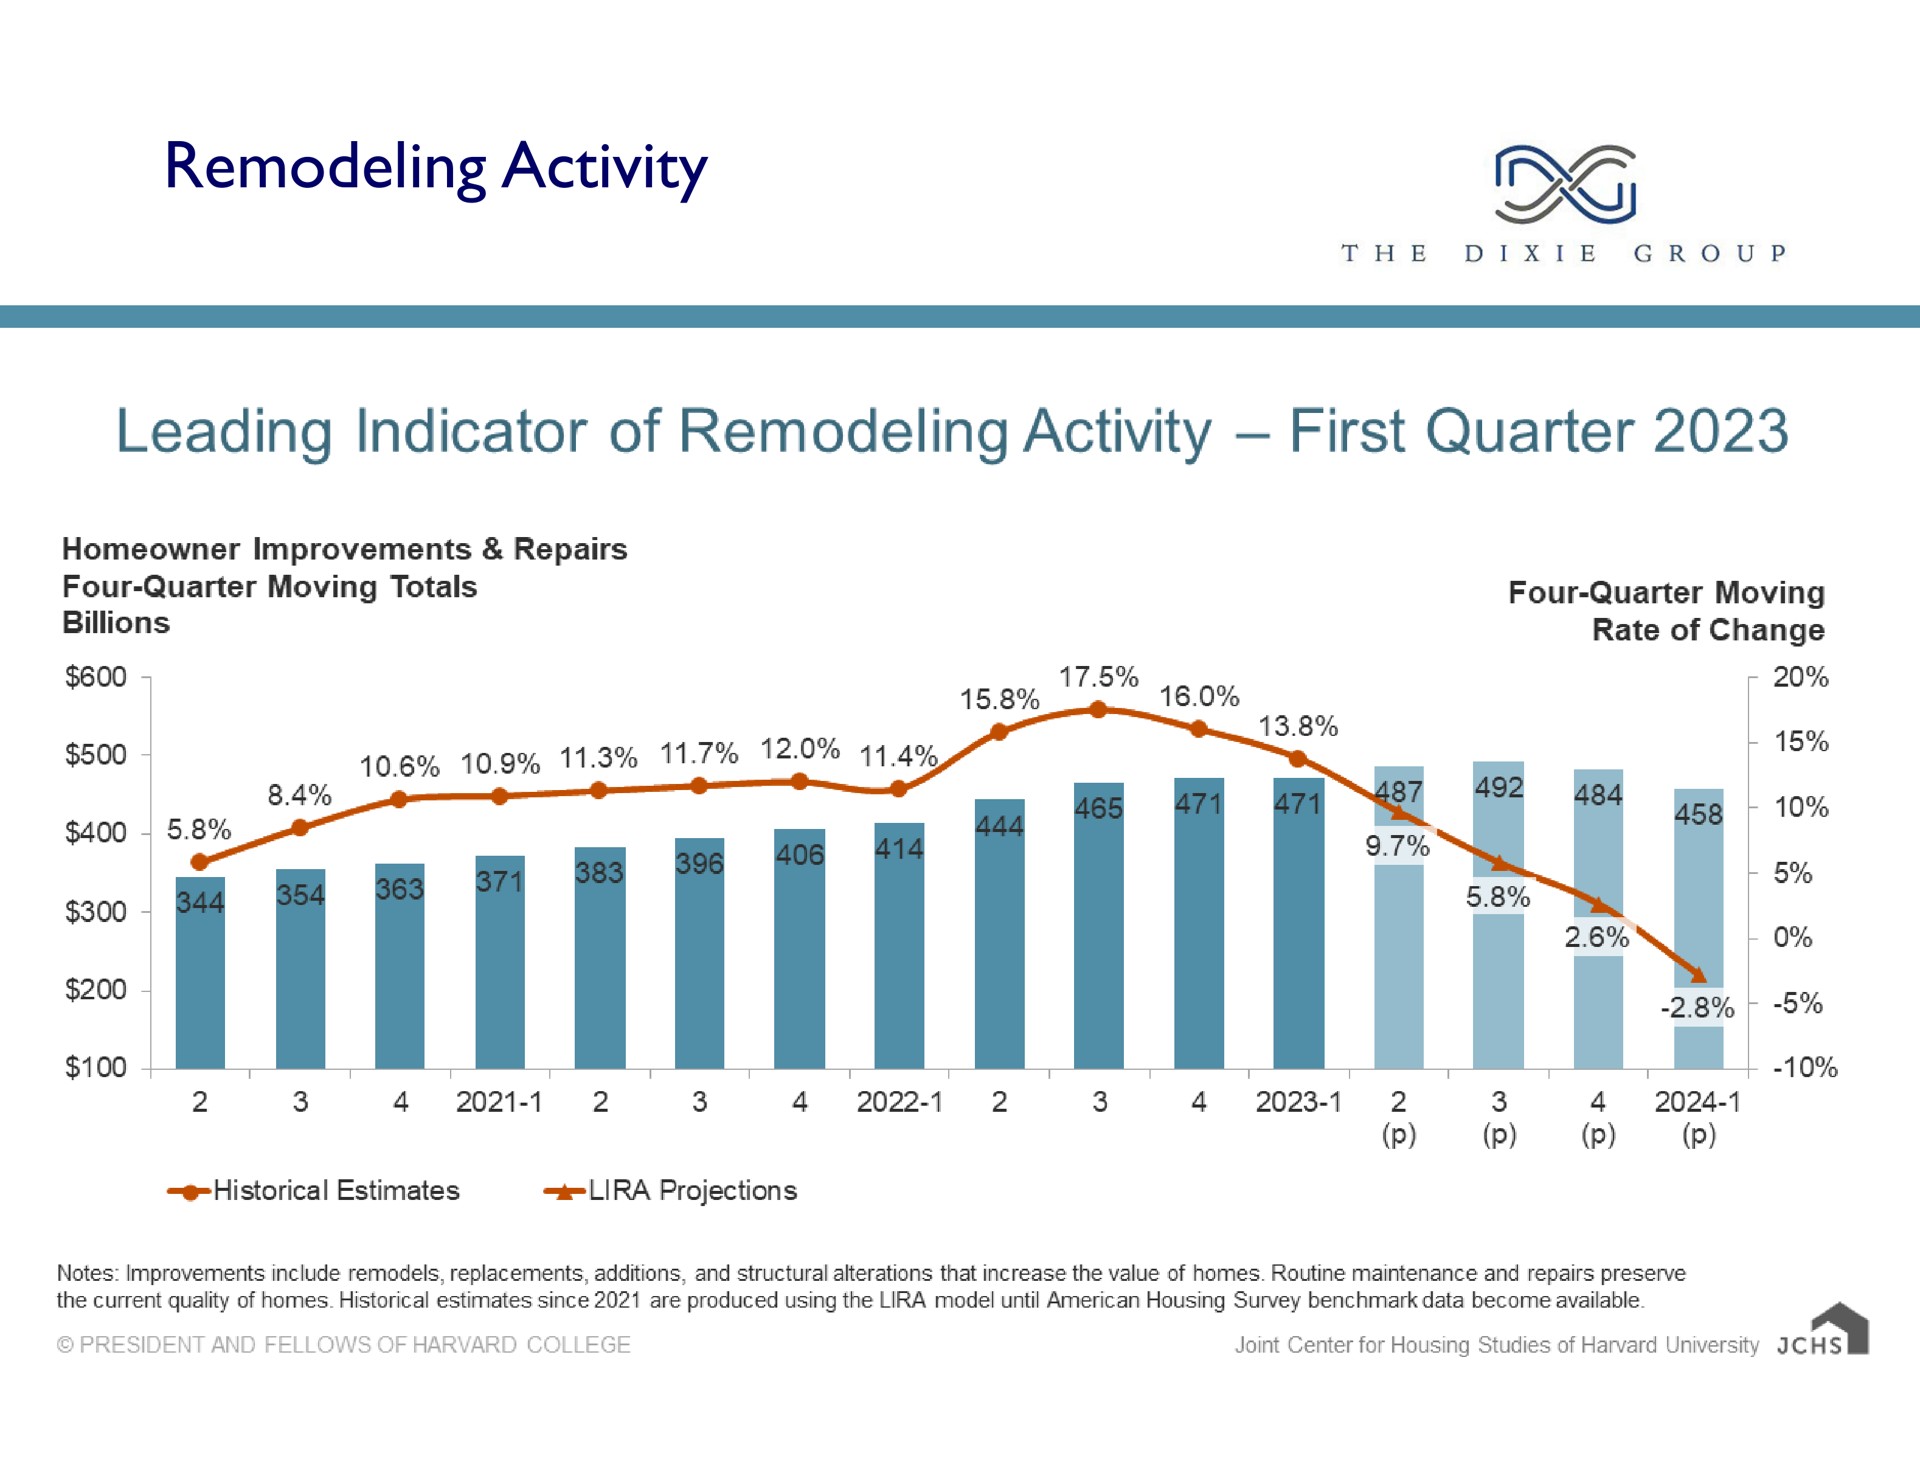 remodeling activity leading indicator of first quarter | The Dixie Group